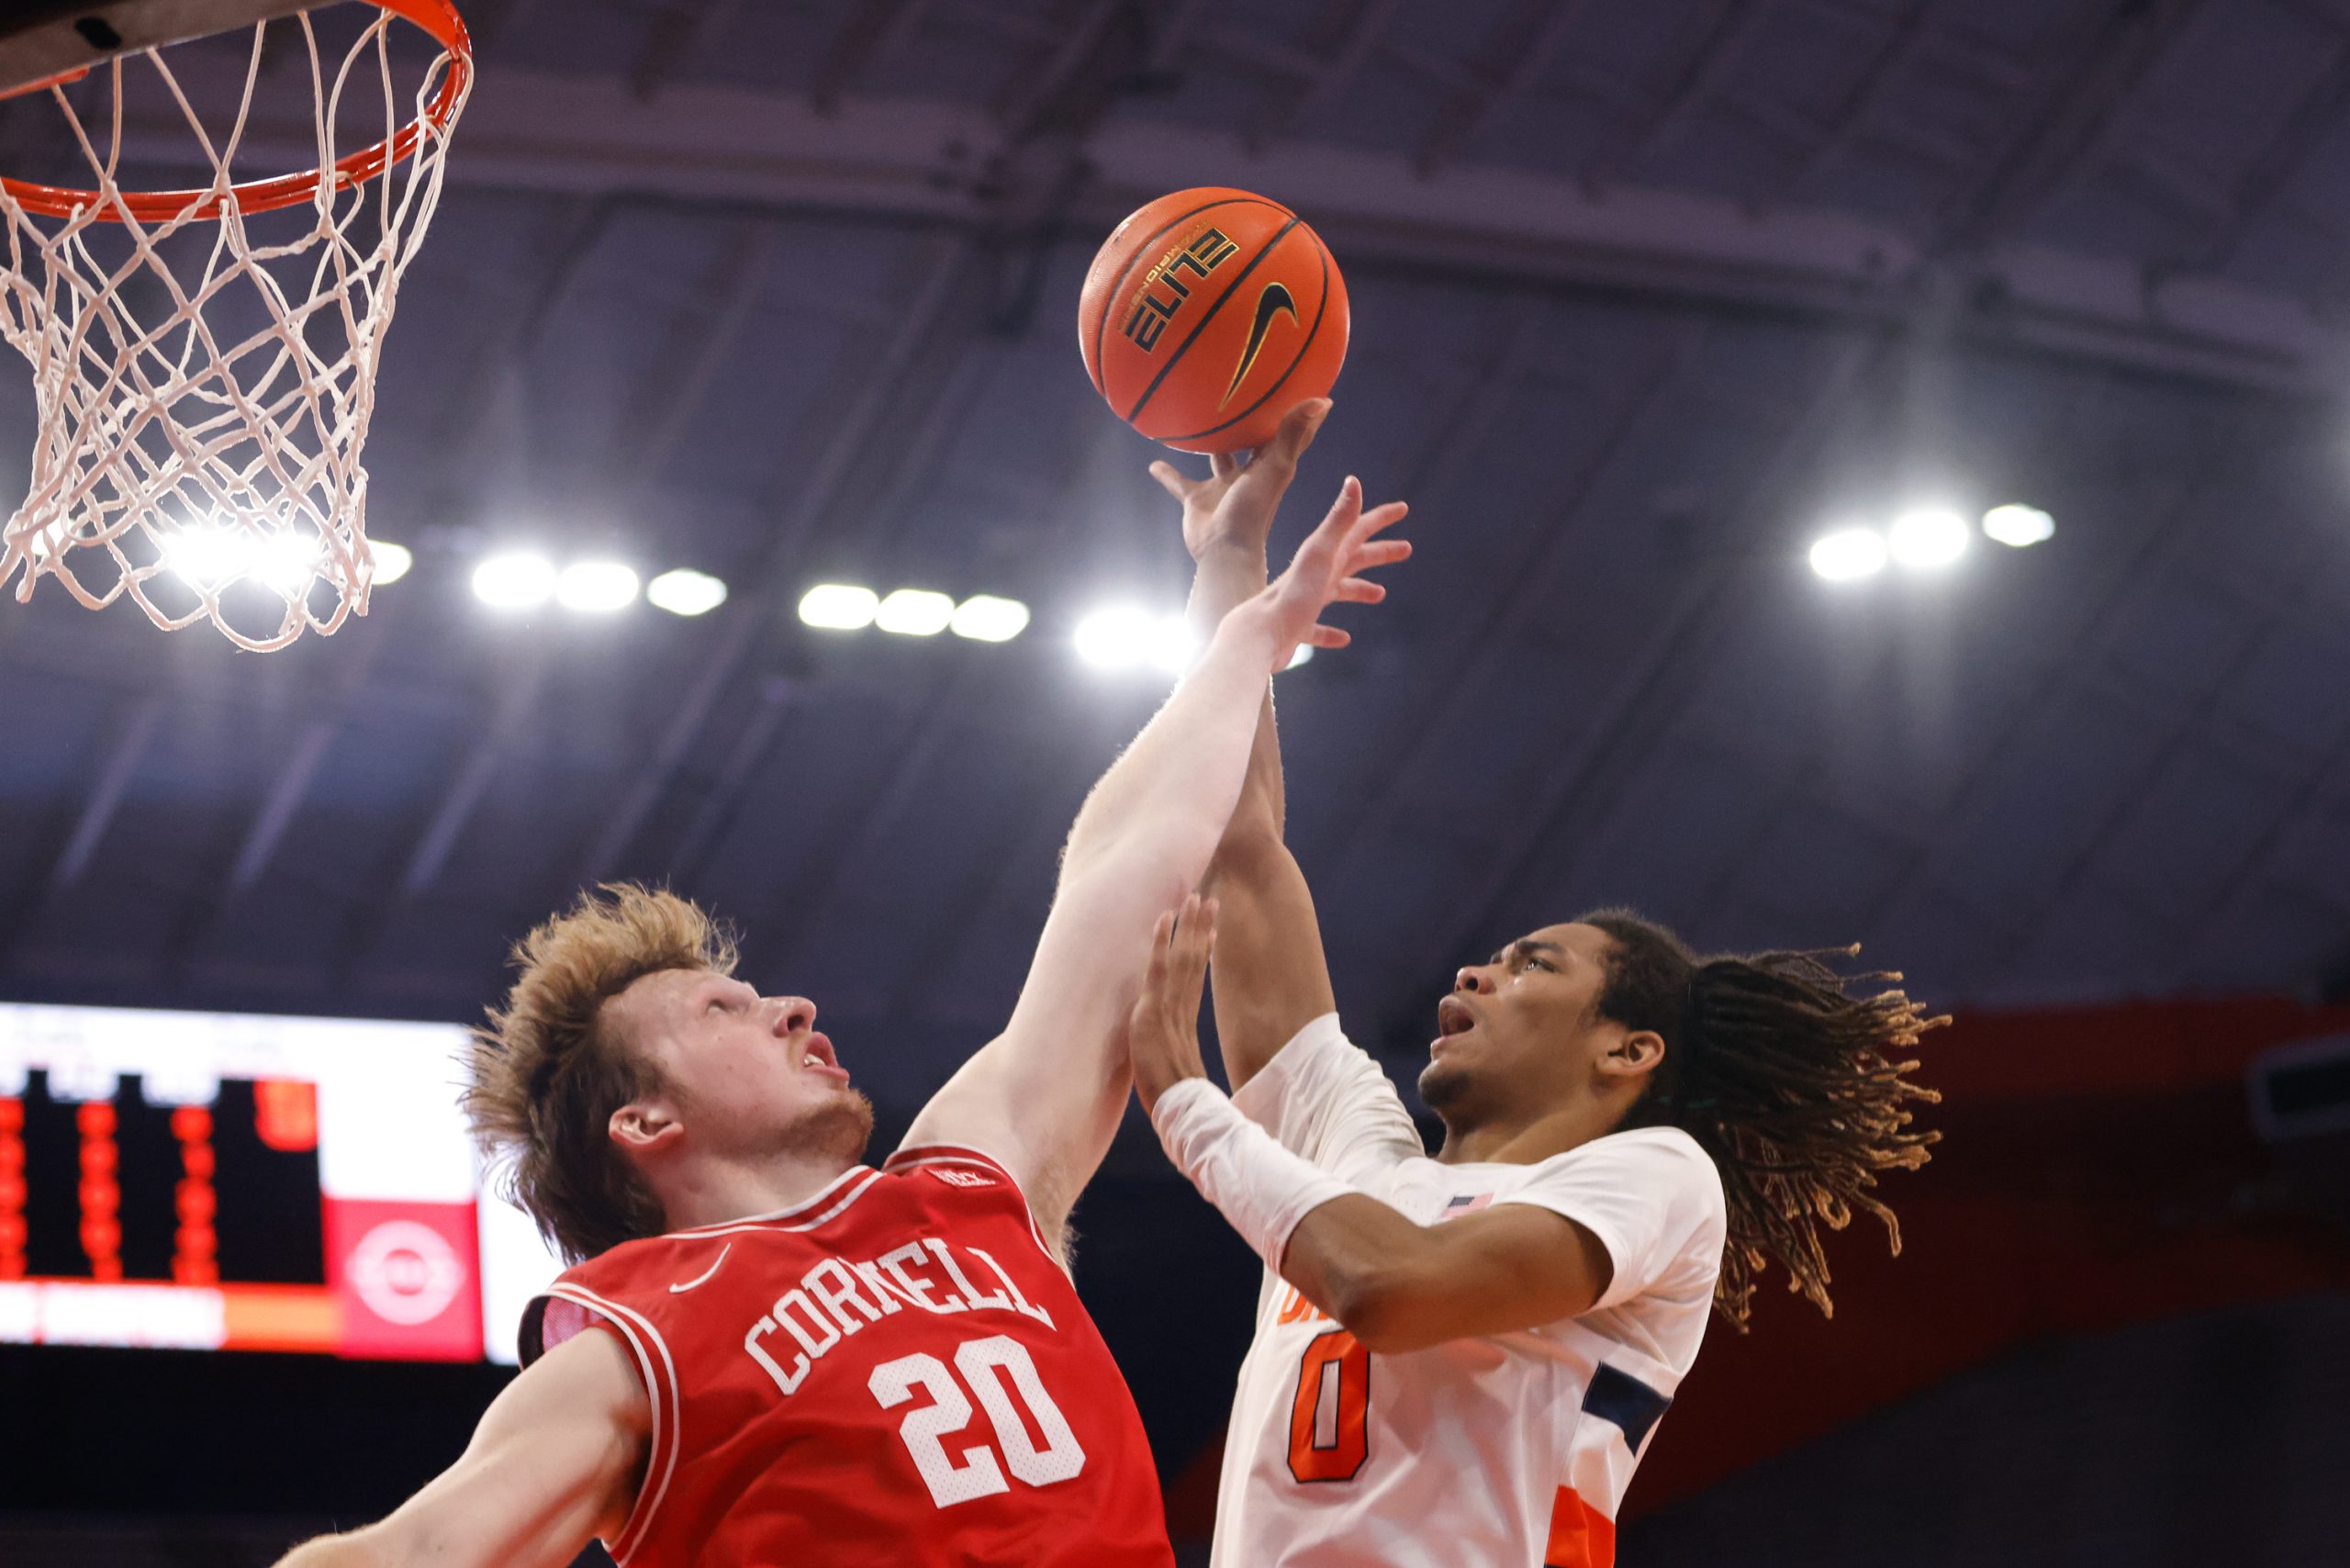 Syracuse's Chris Bell (0) puts up a close-range shot over the outstretched arm of Cornell's Sean Hansen during an NCAA men's basketball game on Saturday at JMA Wireless Dome.